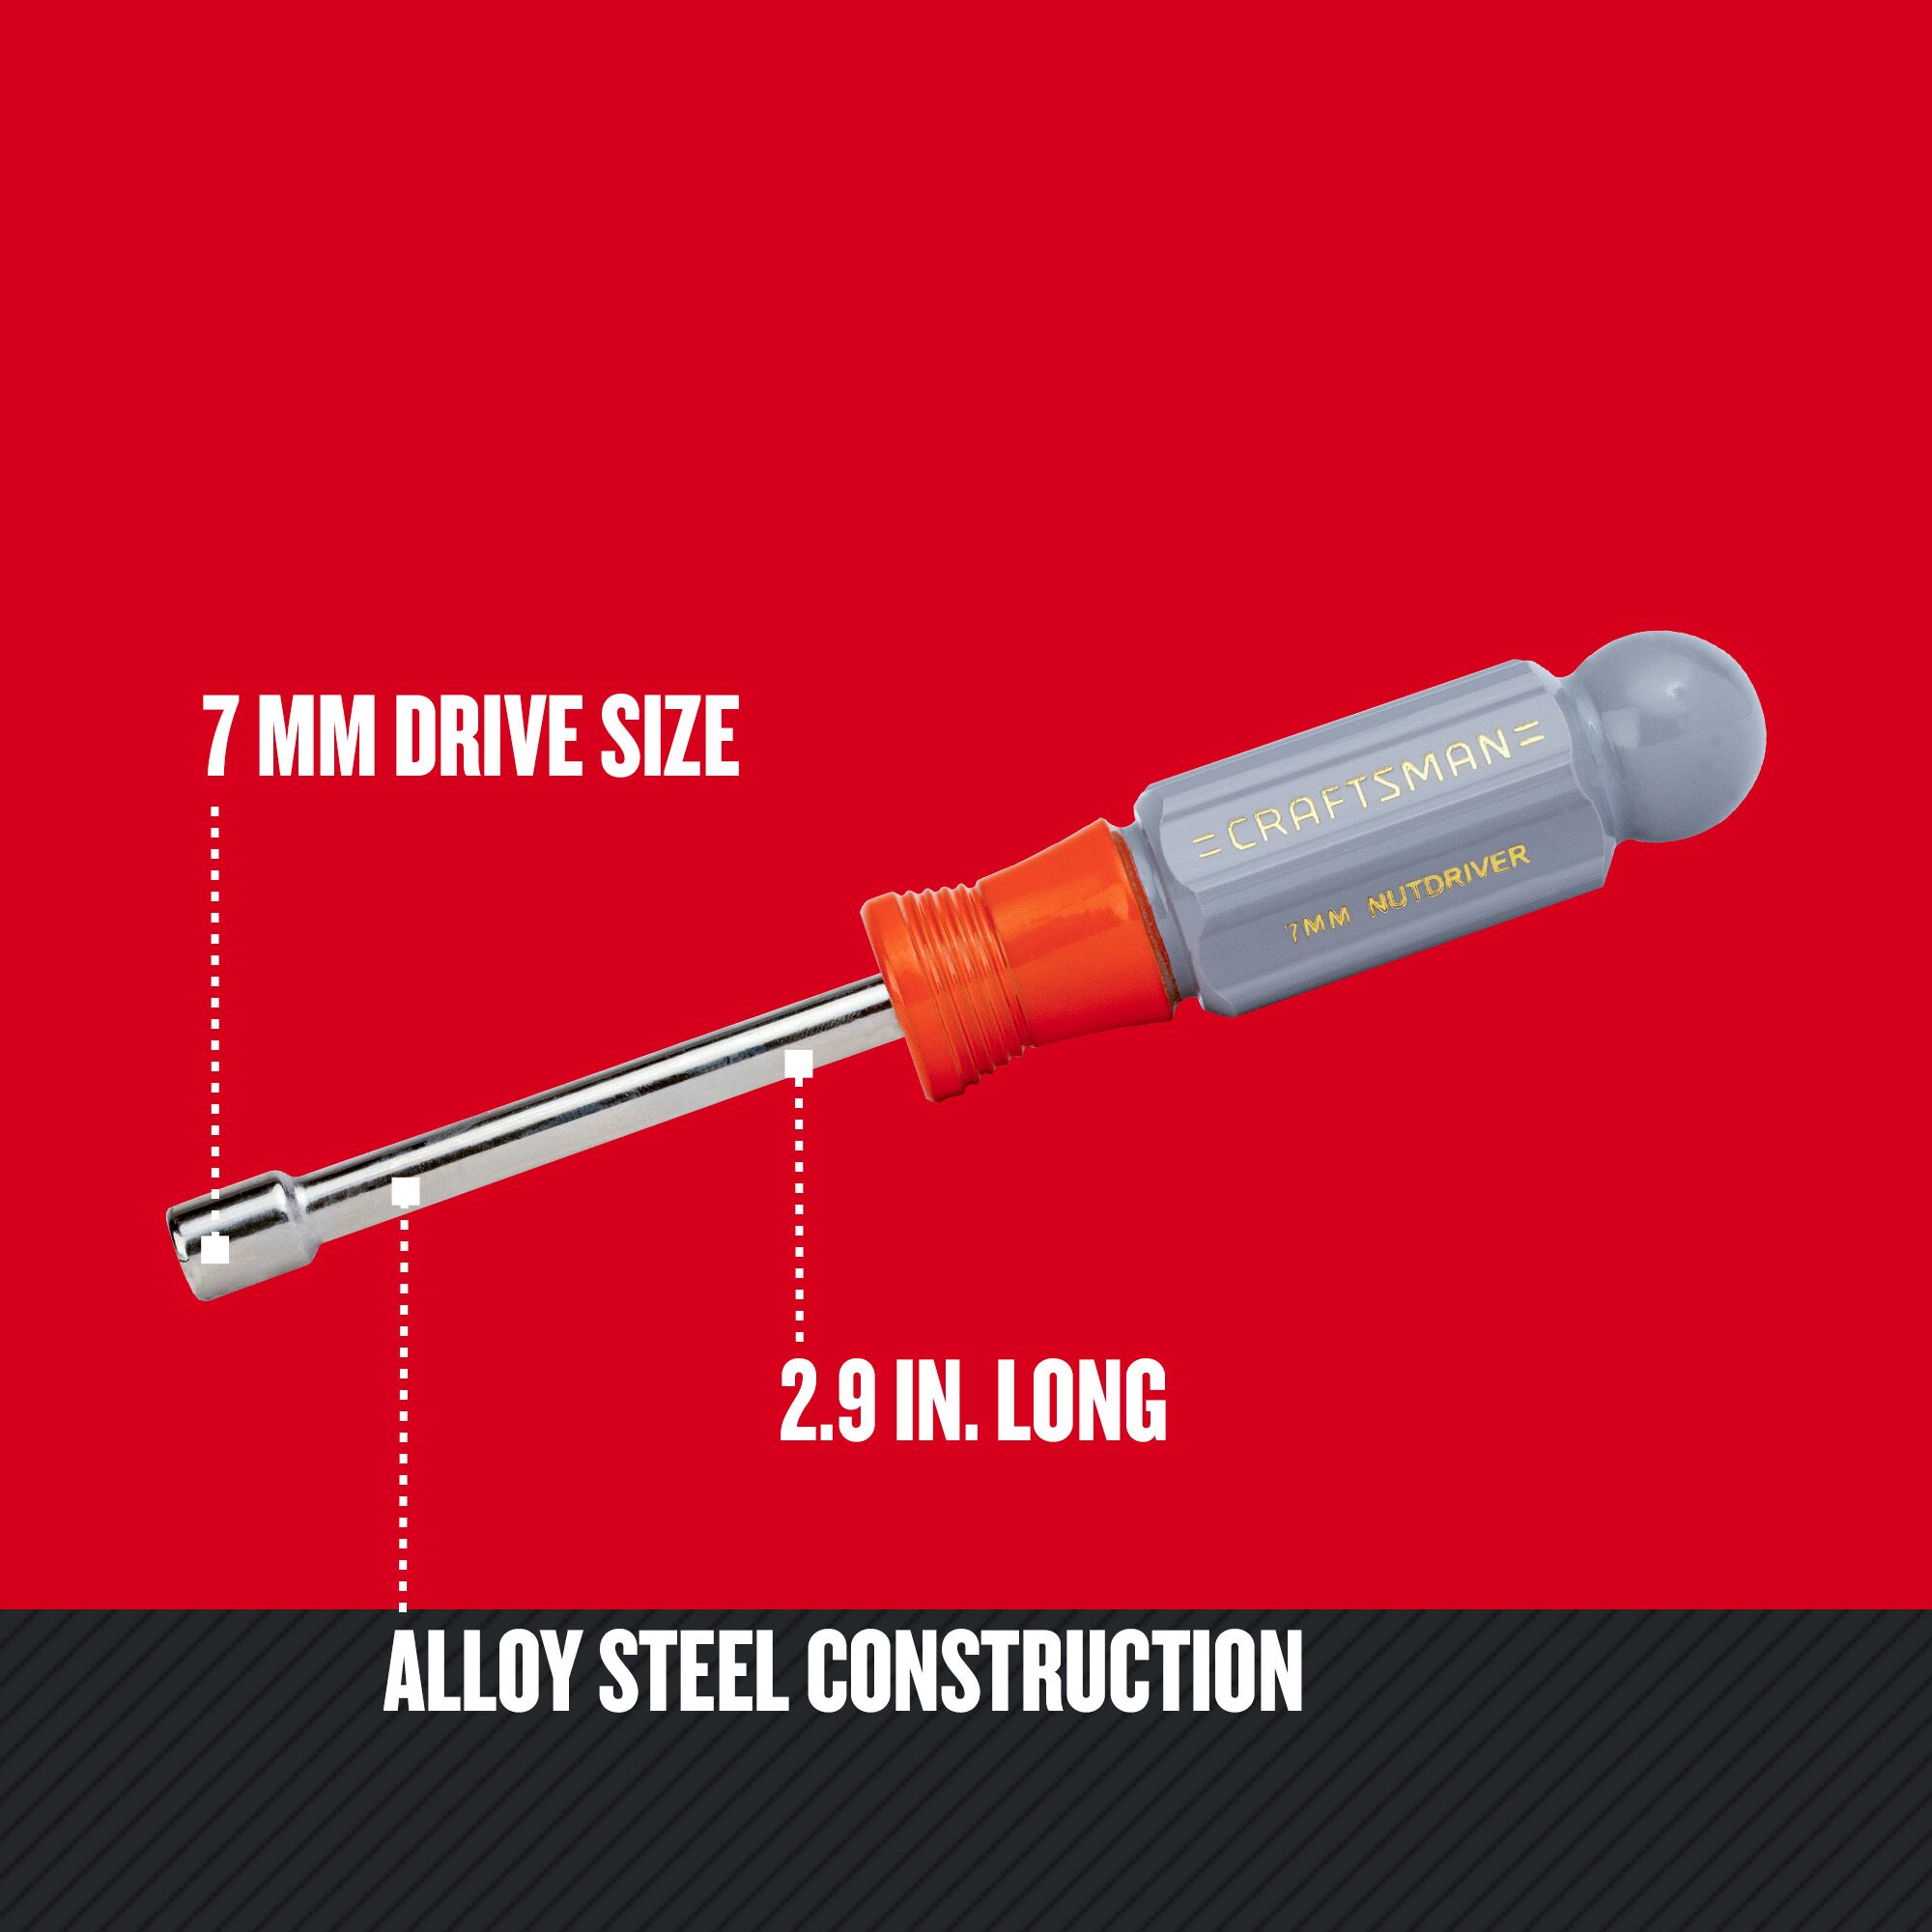 Graphic of CRAFTSMAN Accessories: Nut Drivers highlighting product features